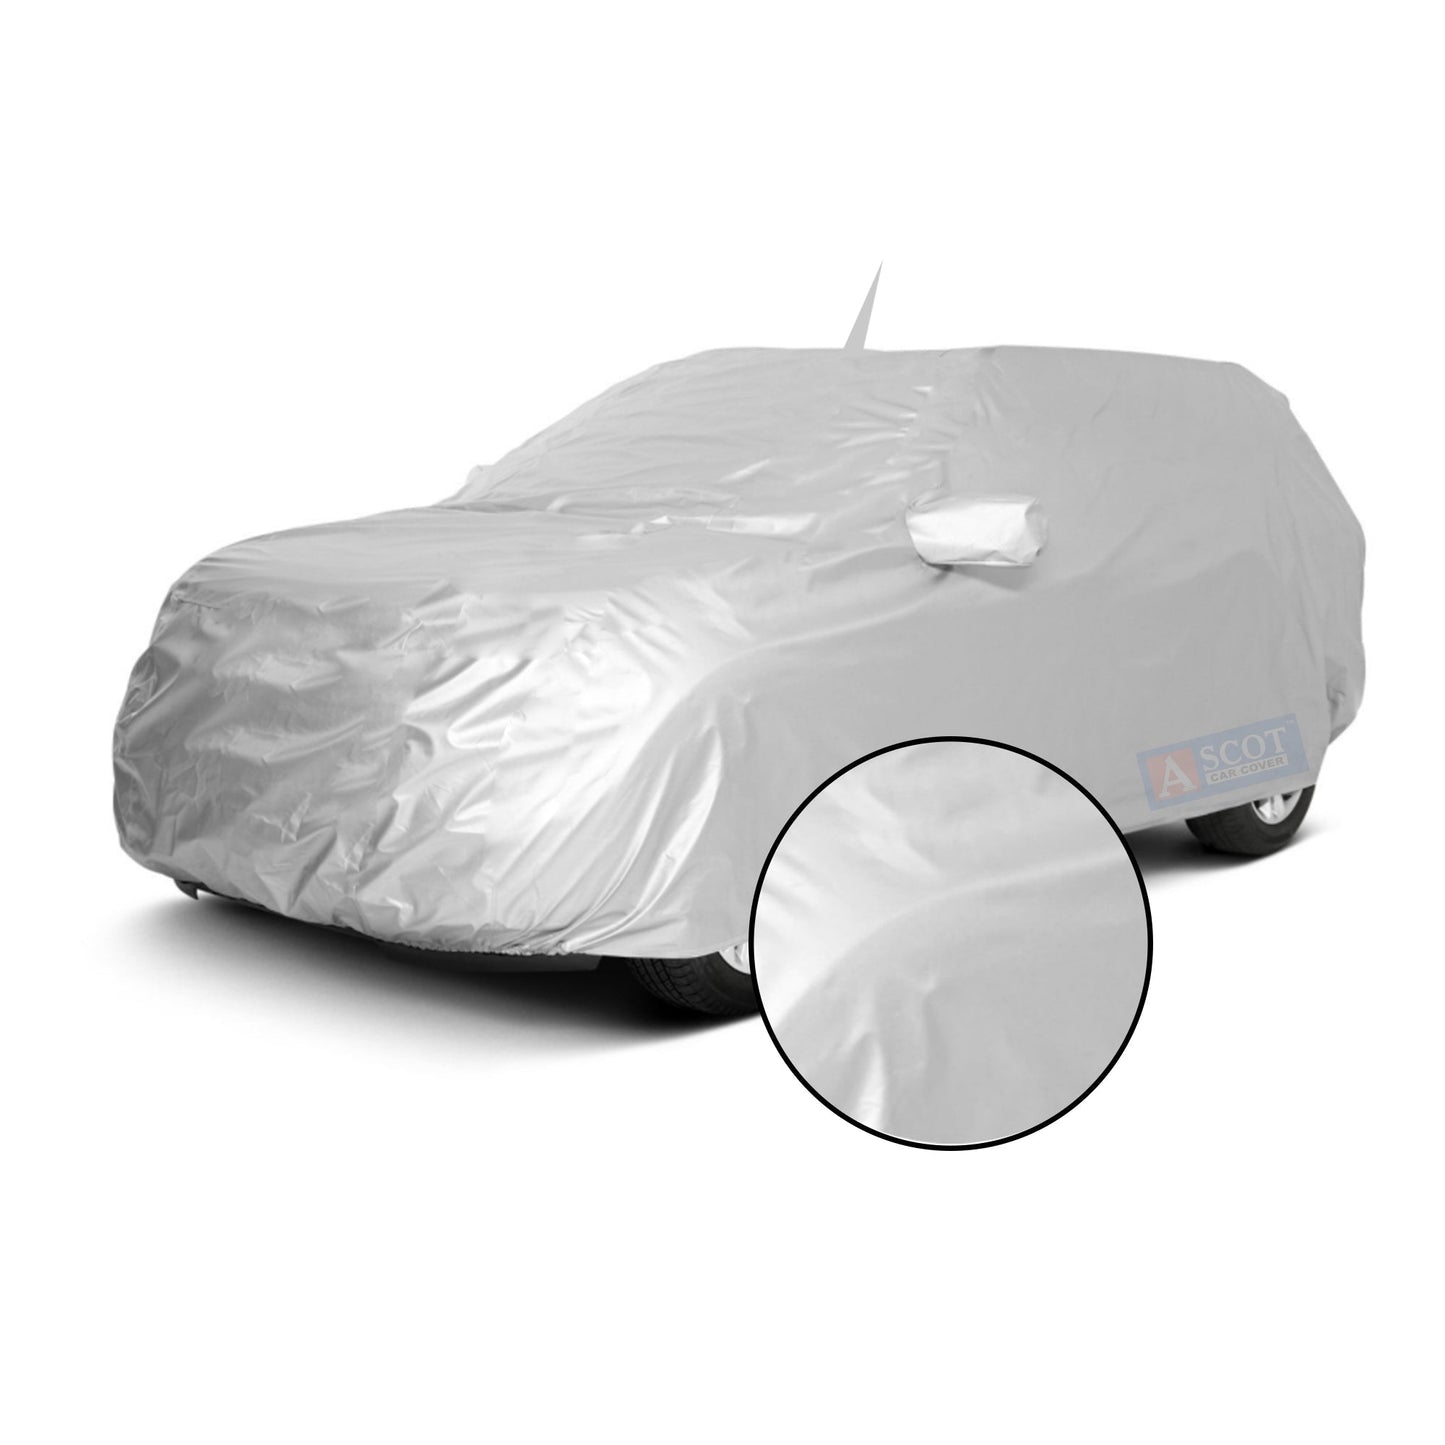 Ascot Mahindra Thar 2010-2020 Model Car Body Cover Dust Proof, Trippel Stitched